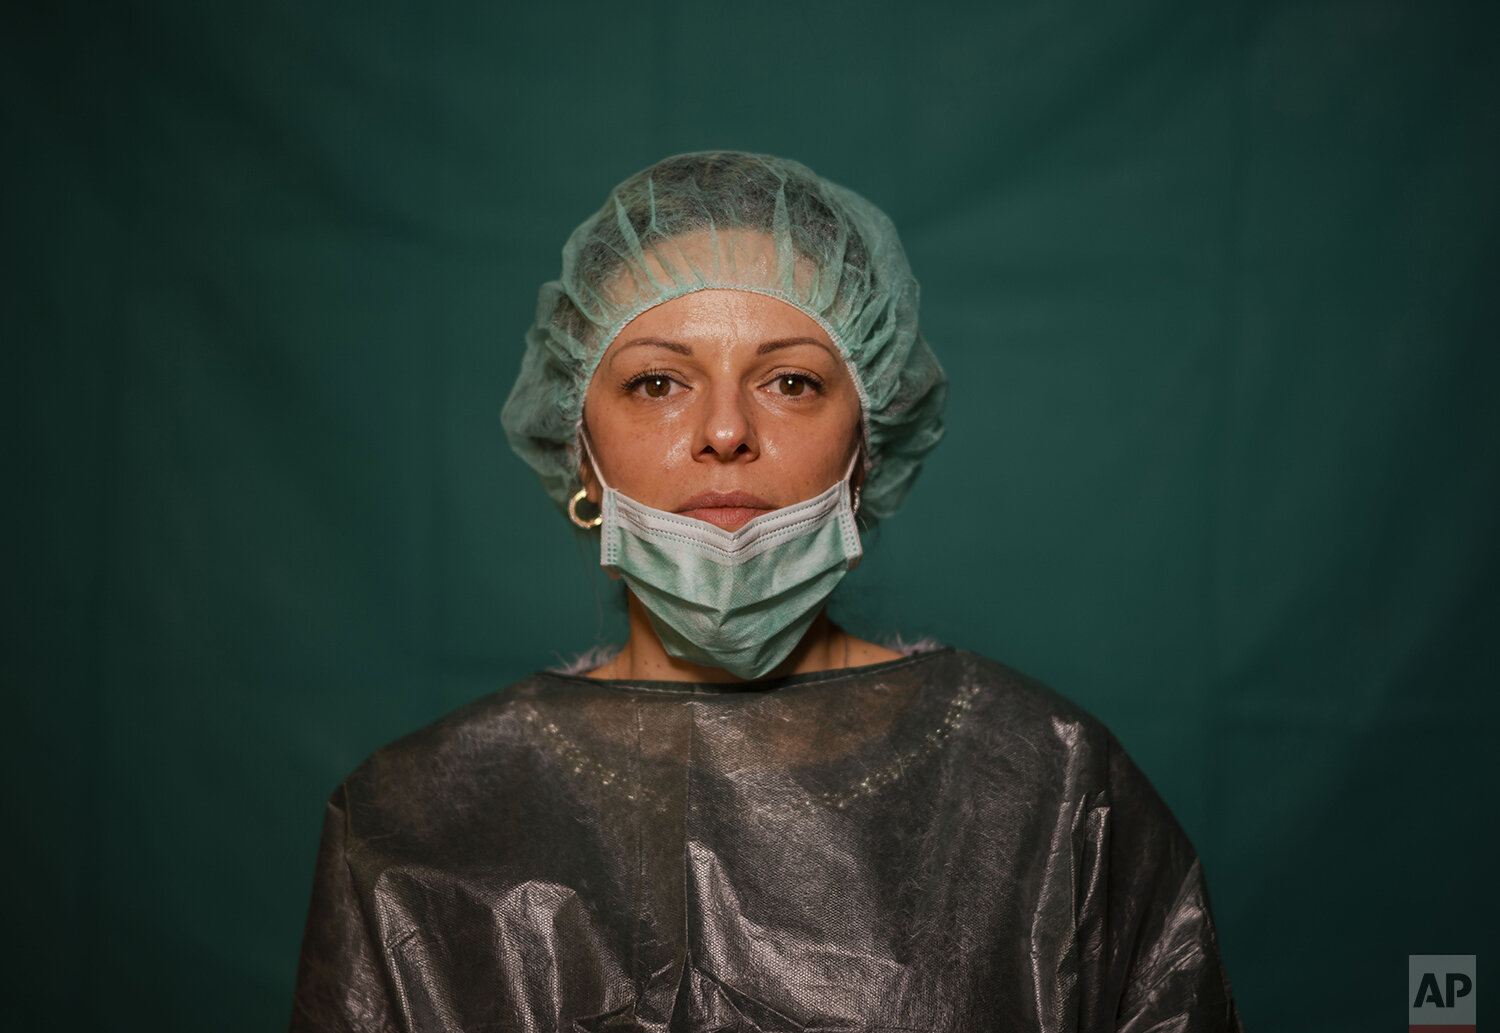  Laura Orsini, 39, an administrative worker at Rome's COVID 3 Spoke Casalpalocco Clinic poses for a portrait, Friday, March 27, 2020, during a break in her daily shift. The intensive care doctors and nurses on the front lines of the coronavirus pande